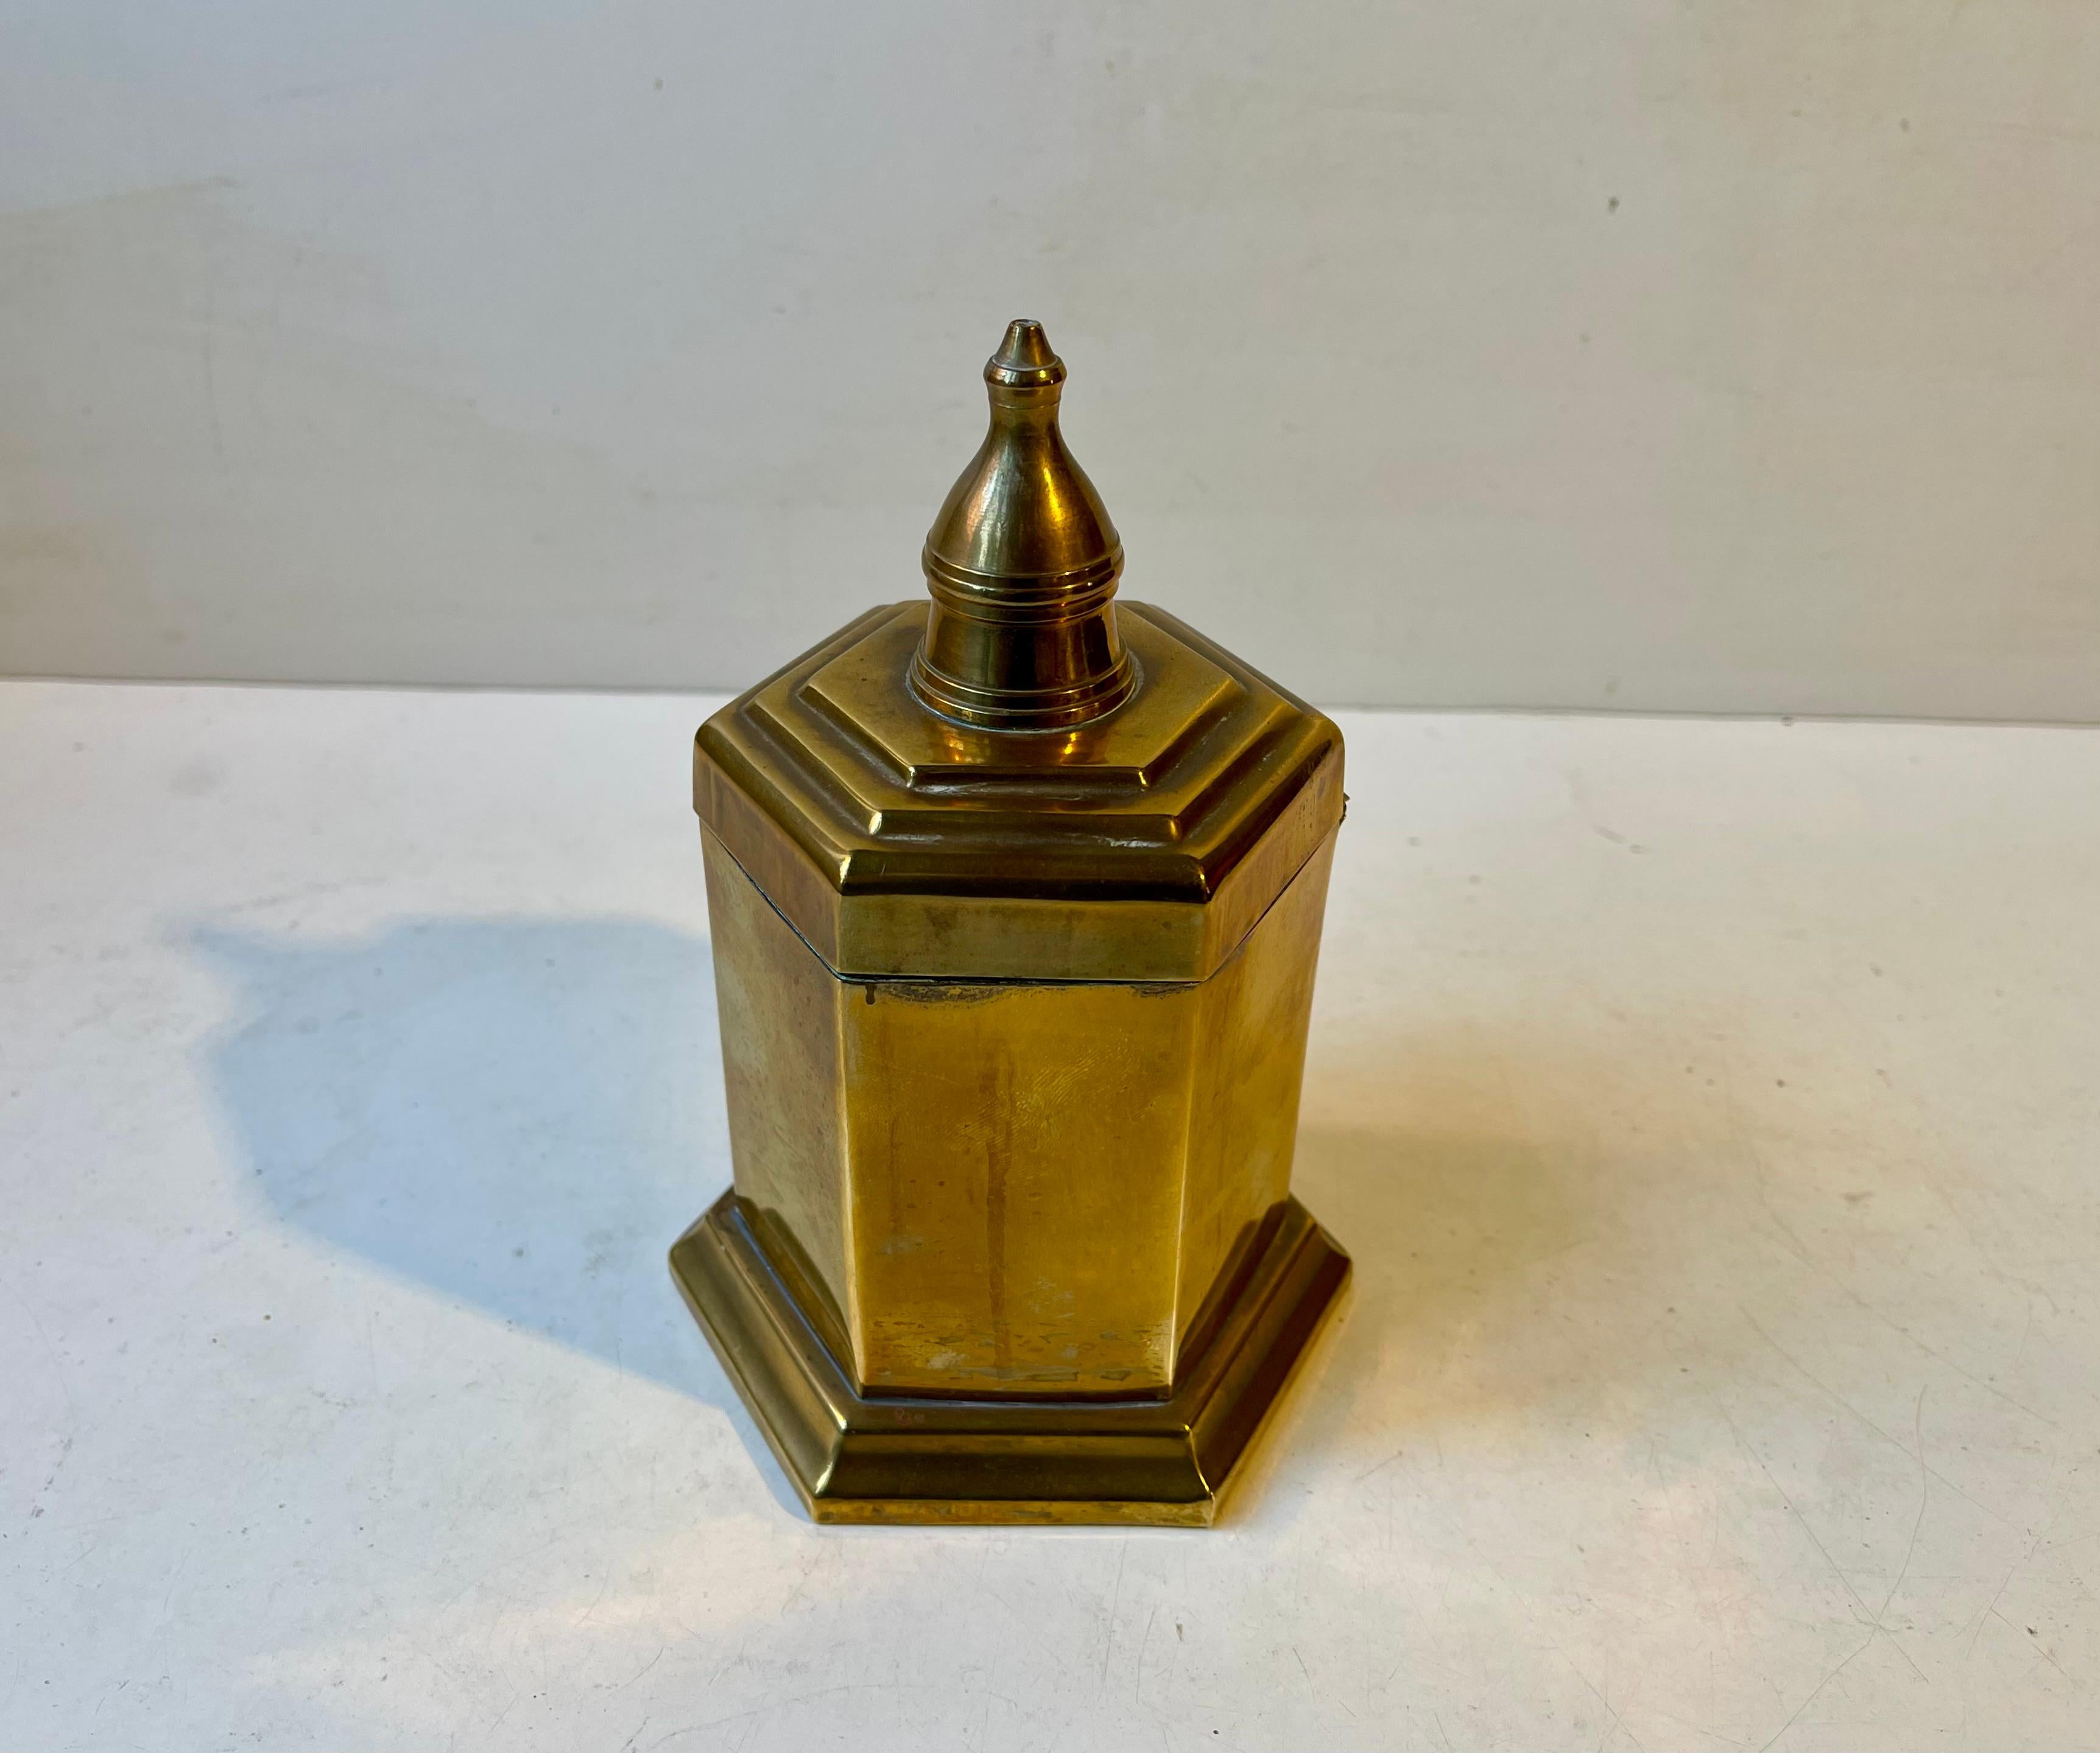 Hexagonal tea caddy - canister in solid brass. Probably made in England during the 1920s or 30s. Art Deco styling particular to the architecturally perceived 'staired' design on the lid. It display a rich and beautiful patina consistent with its